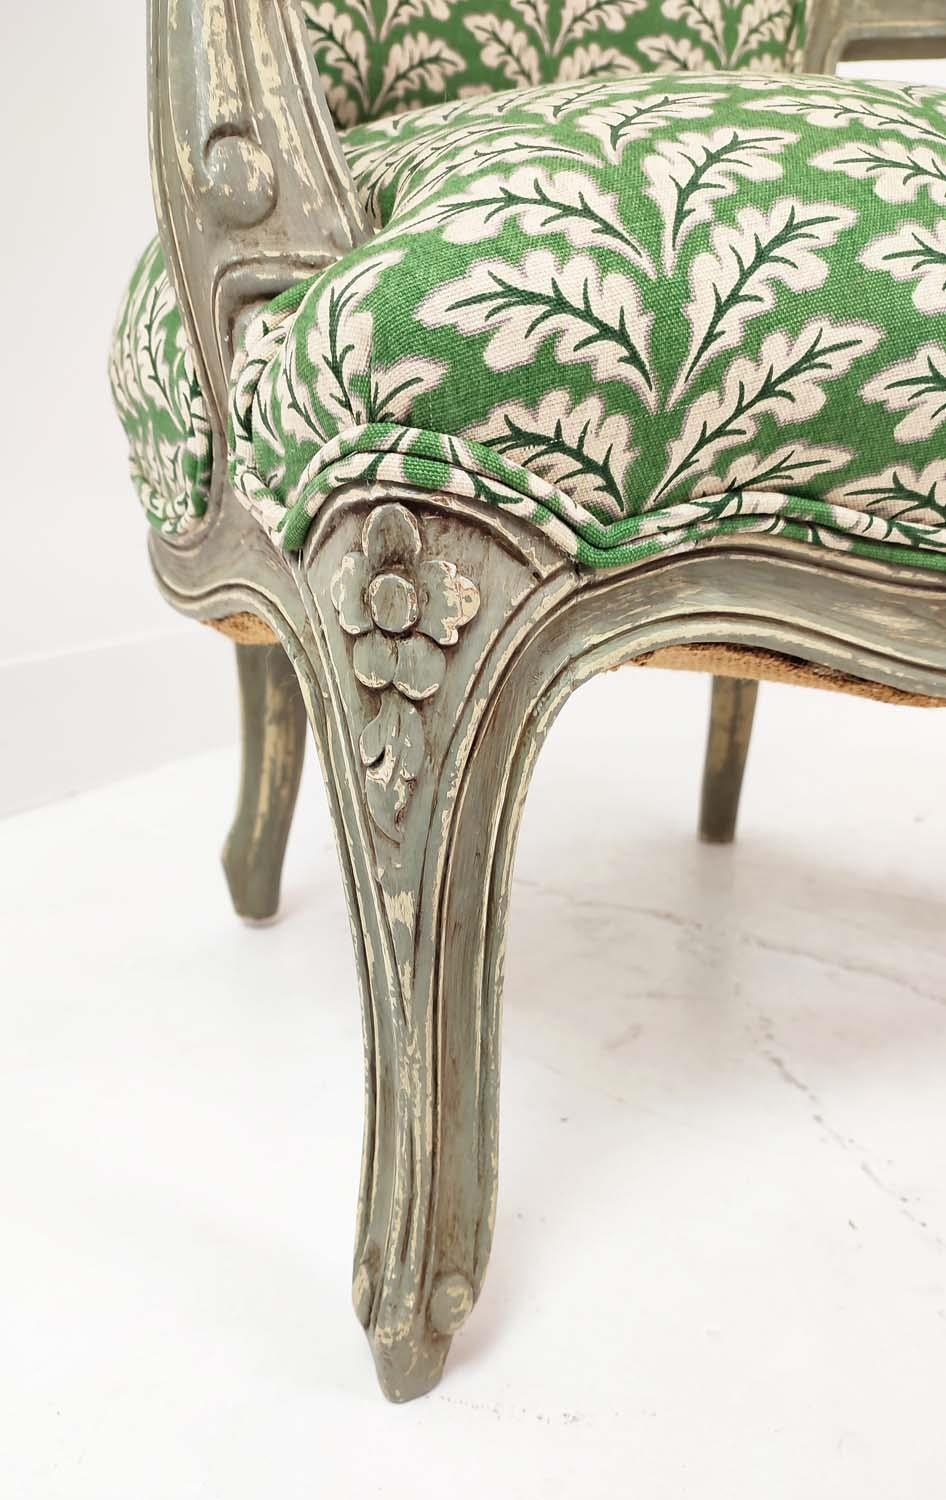 FAUTEUILS, a pair, Louis XV style, grey painted with green leaf patterned upholstery, 92cm H x - Image 5 of 8